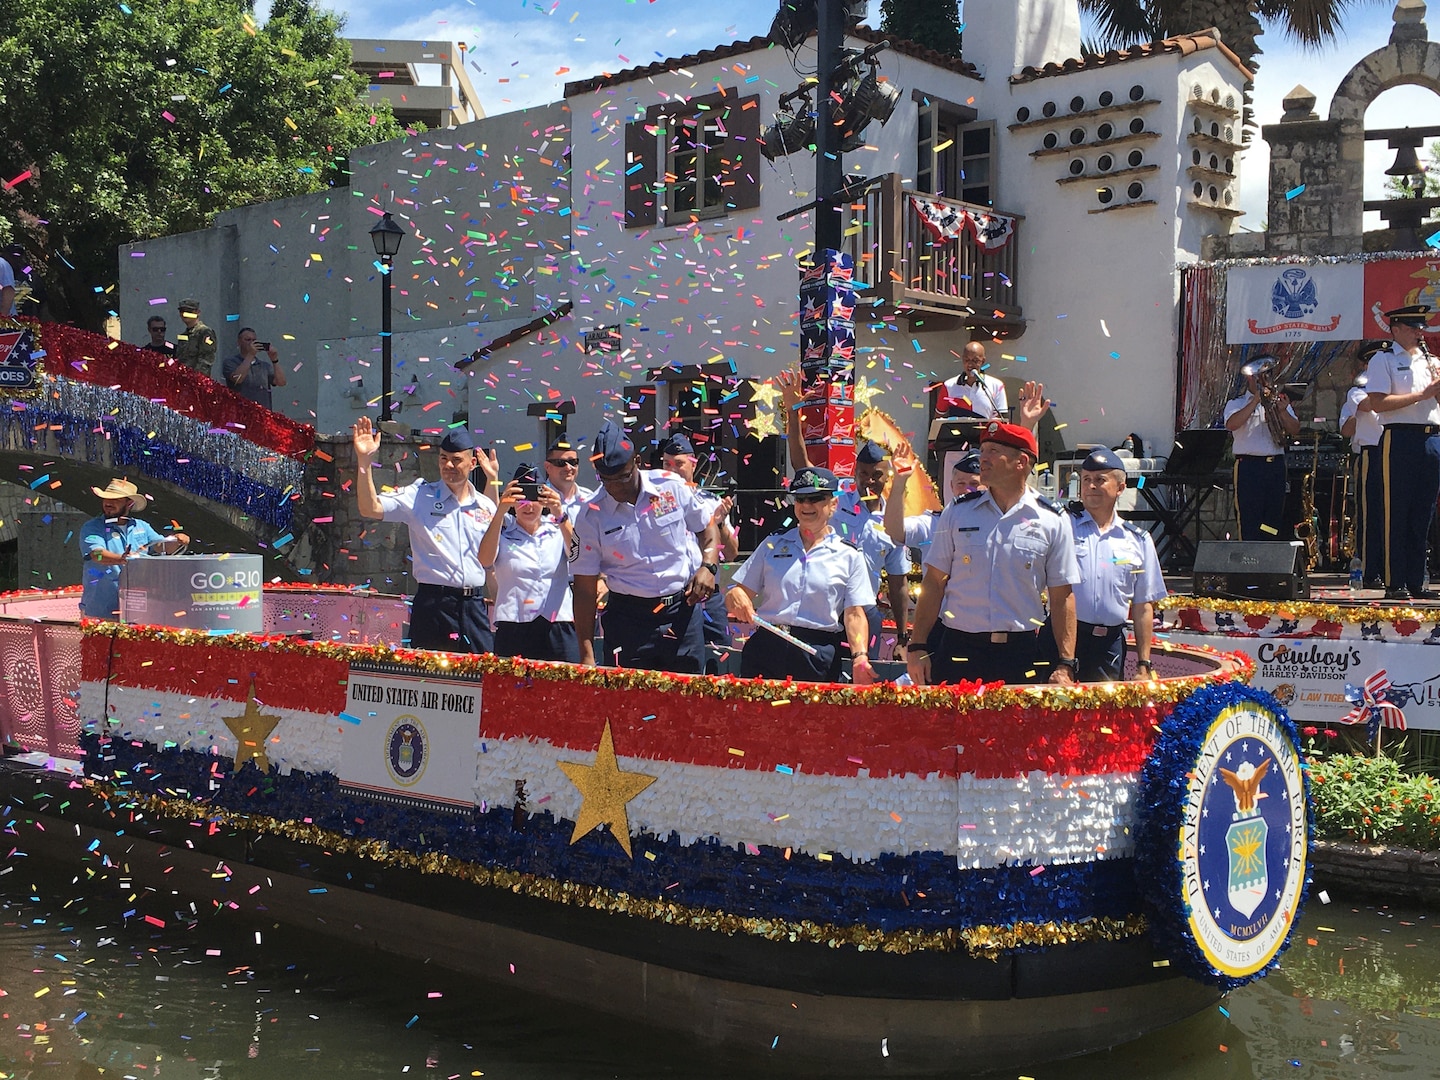 Senior Air Force leaders from Joint Base San Antonio, Texas, participate in the annual Armed Forces River Parade on the San Antonio River Walk, July 3, 2021. Col. Richard Erredge, 960th Cyberspace Wing commander, and Chief Master Sgt. Christopher Howard, 960th Cyberspace Operations Group superintendent, represented the 960th CW Gladiators during the event. (U.S. Air Force photo by Kathleen Salazar)